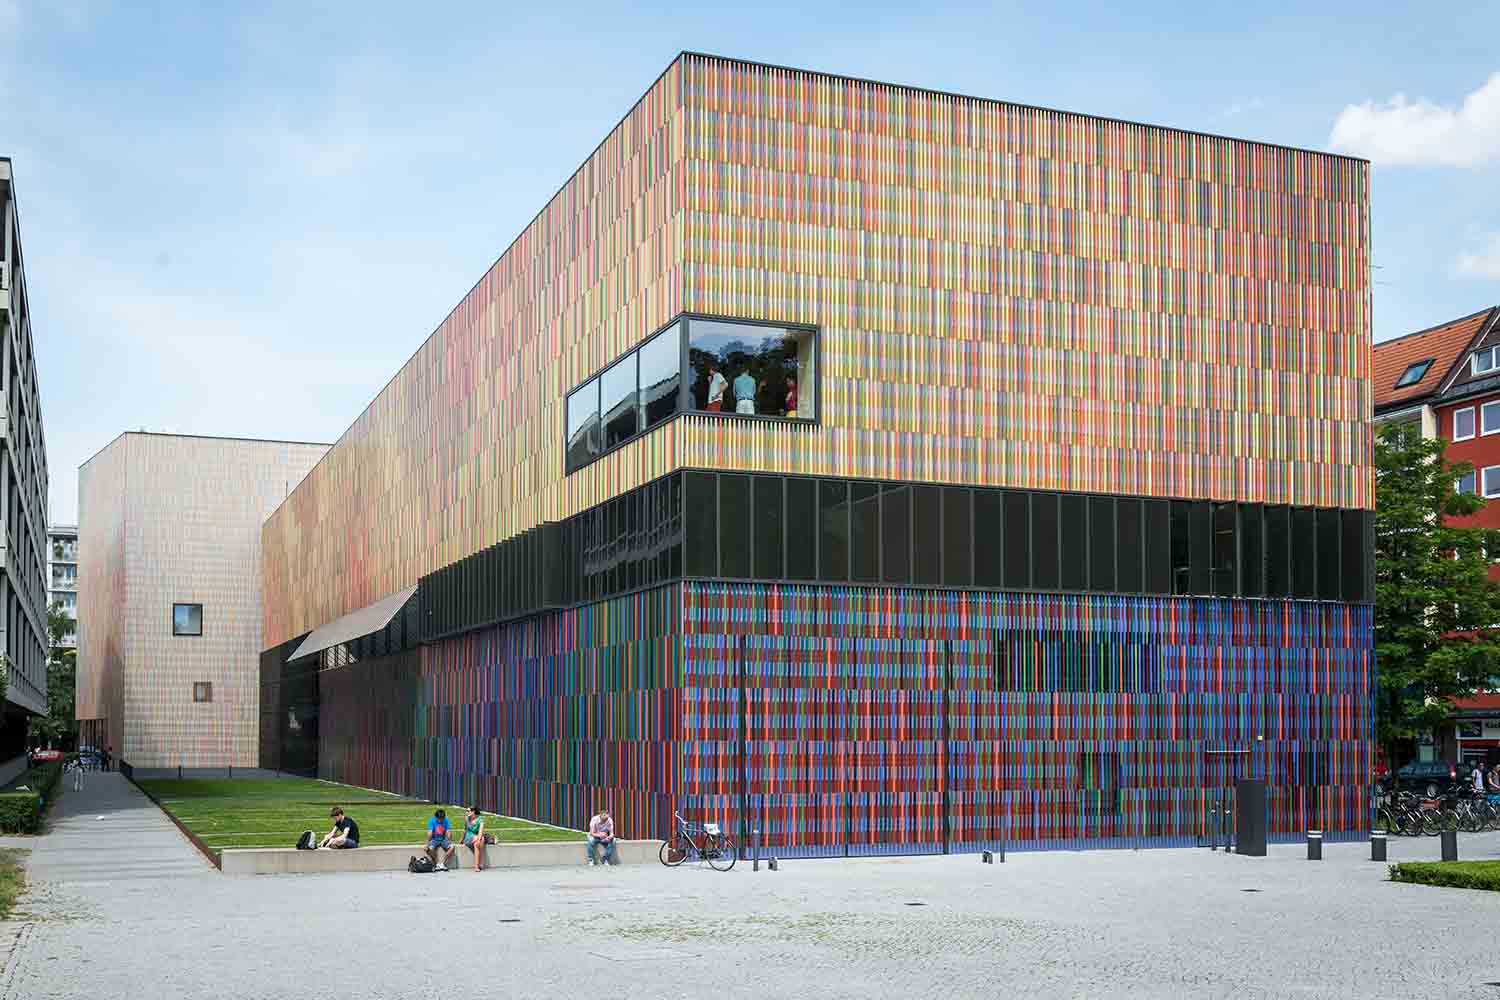 Exterior of the Brandhorst Museum in colourful cube-like building